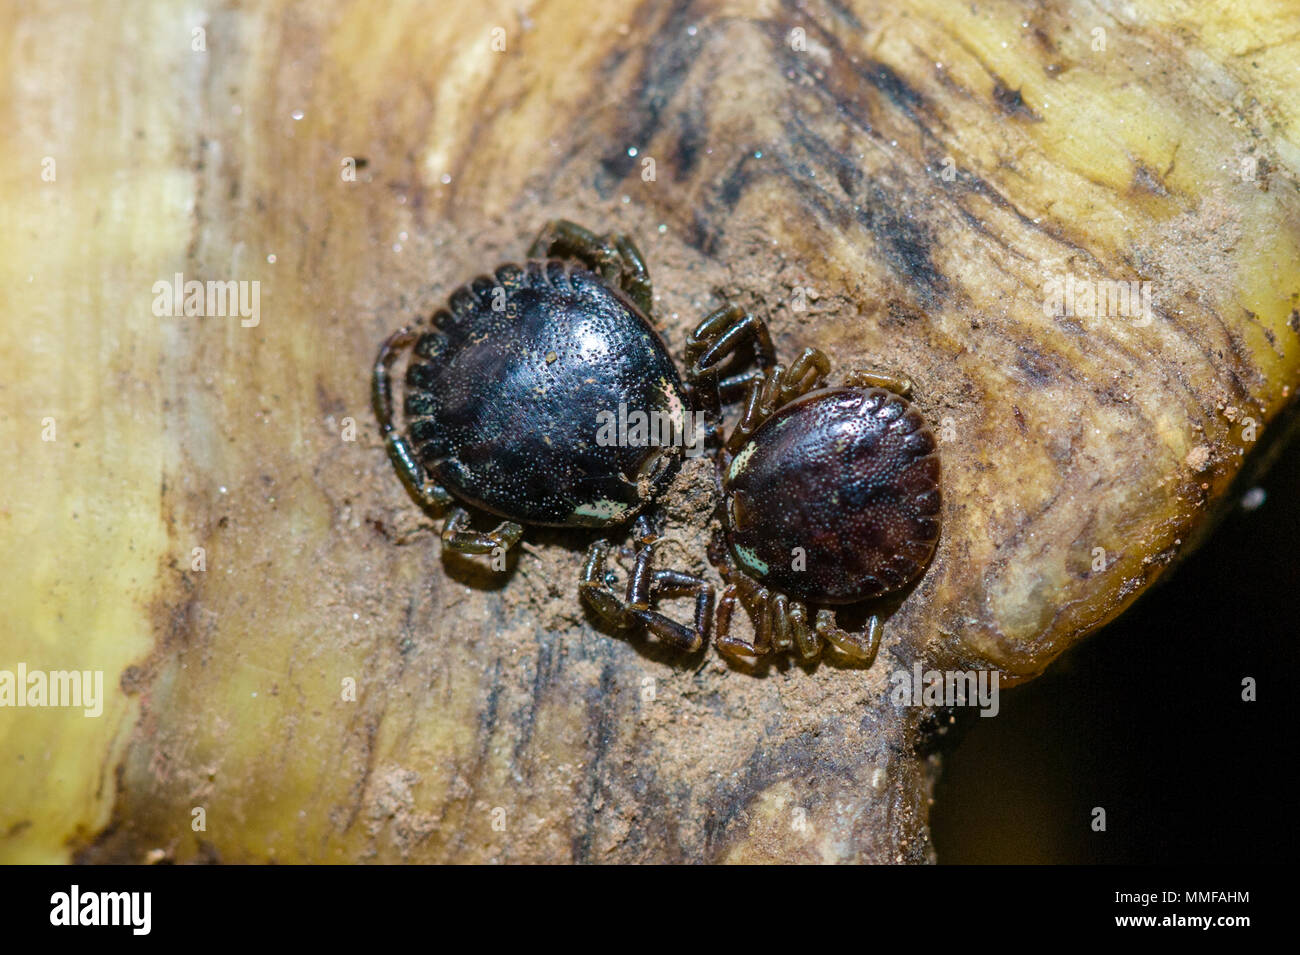 A pair of Lone Star Ticks attached and feeding on blood from the plastron of a Vulnerable Yellow-footed Tortoise. Stock Photo